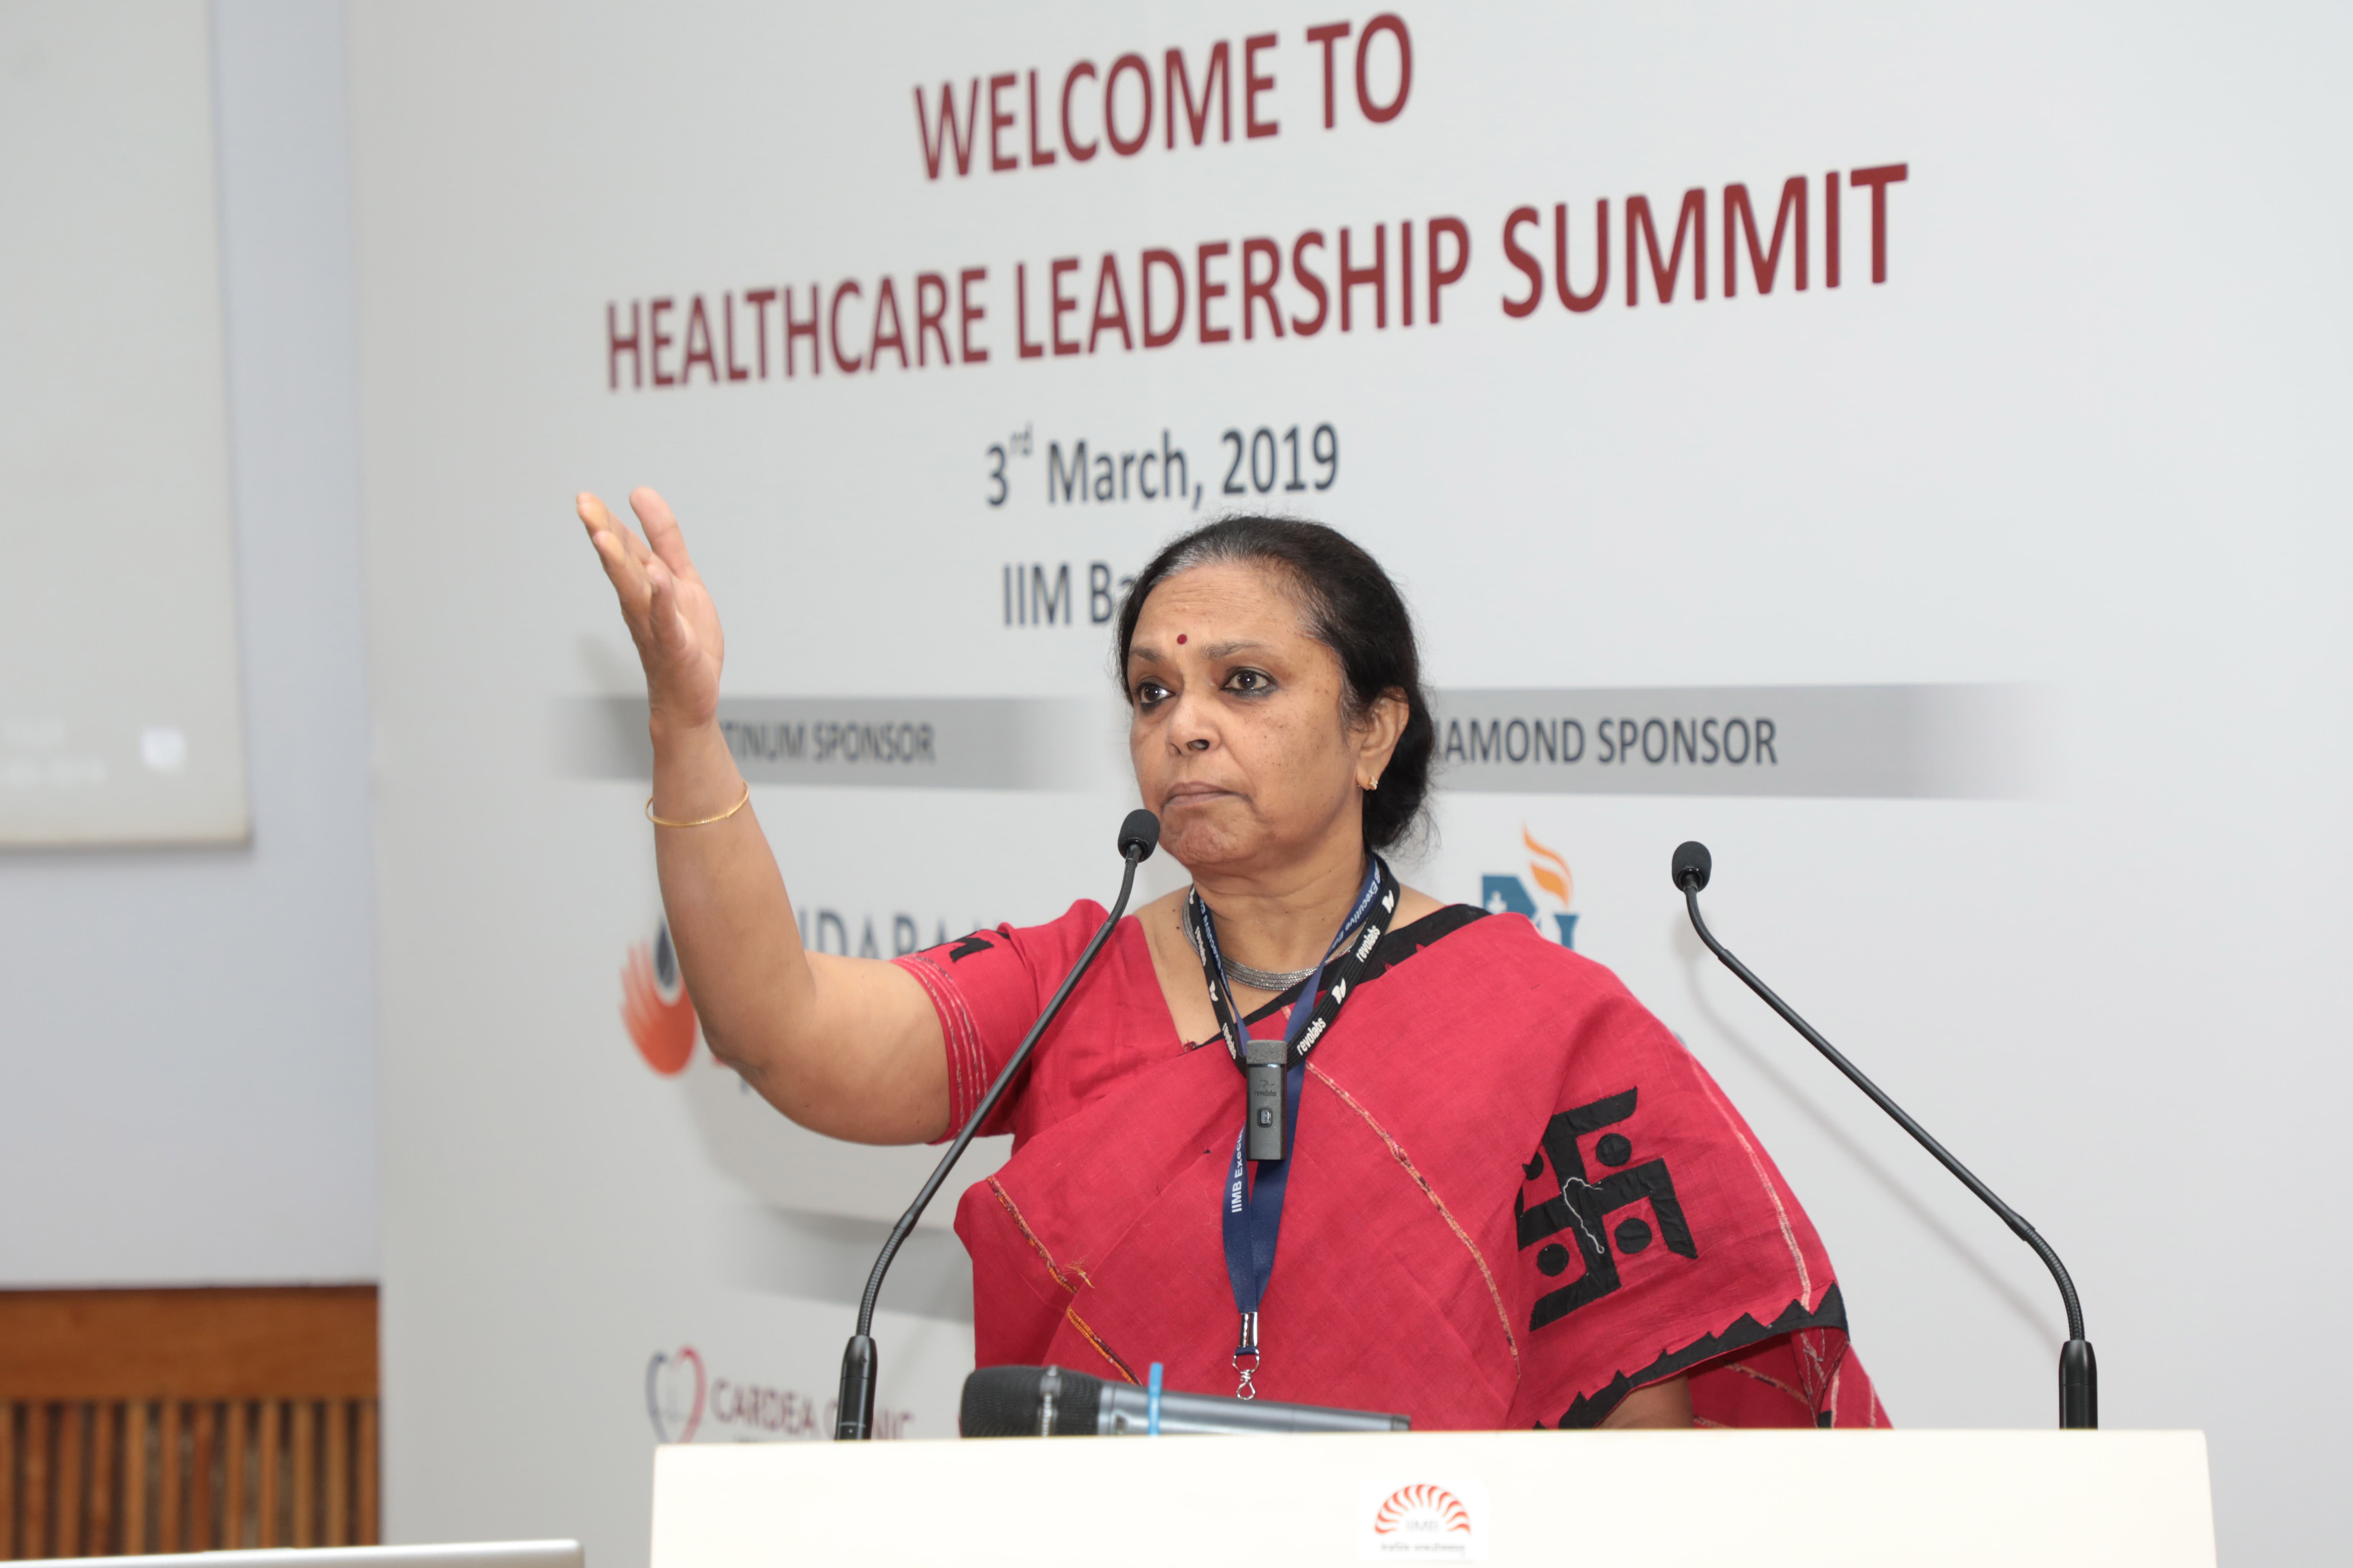 K. Sujatha Rao, author and former Union Secretary of the Ministry of Health and Family Welfare, Government of India, delivers the keynote address.